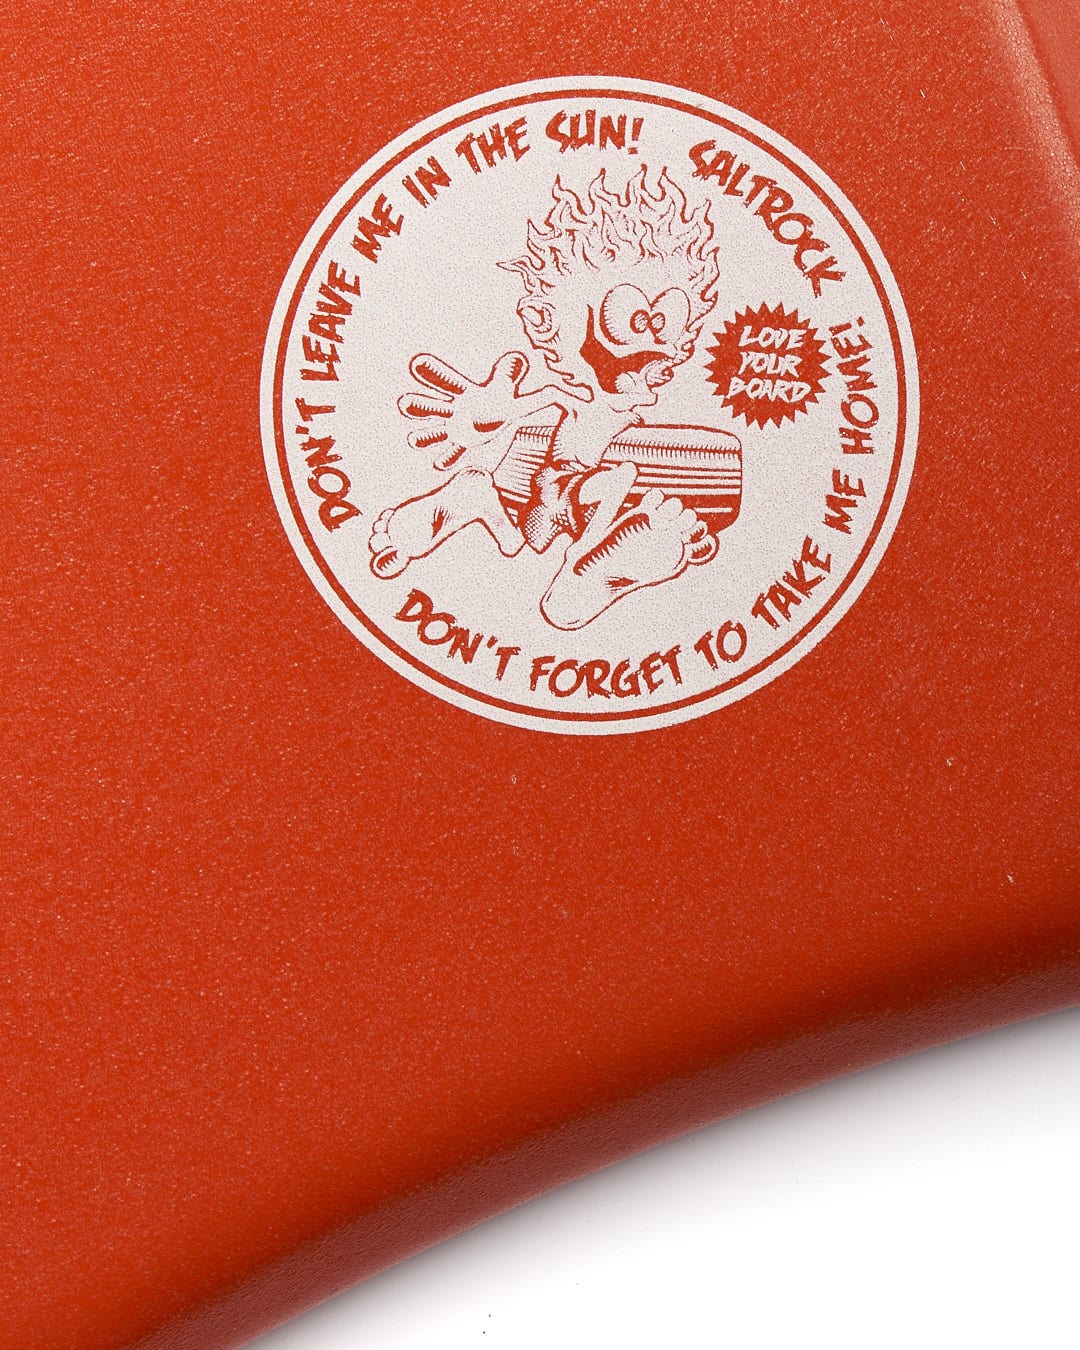 A Saltrock Soul Stream 41" Bodyboard - Red case with an image of a cartoon character on it.